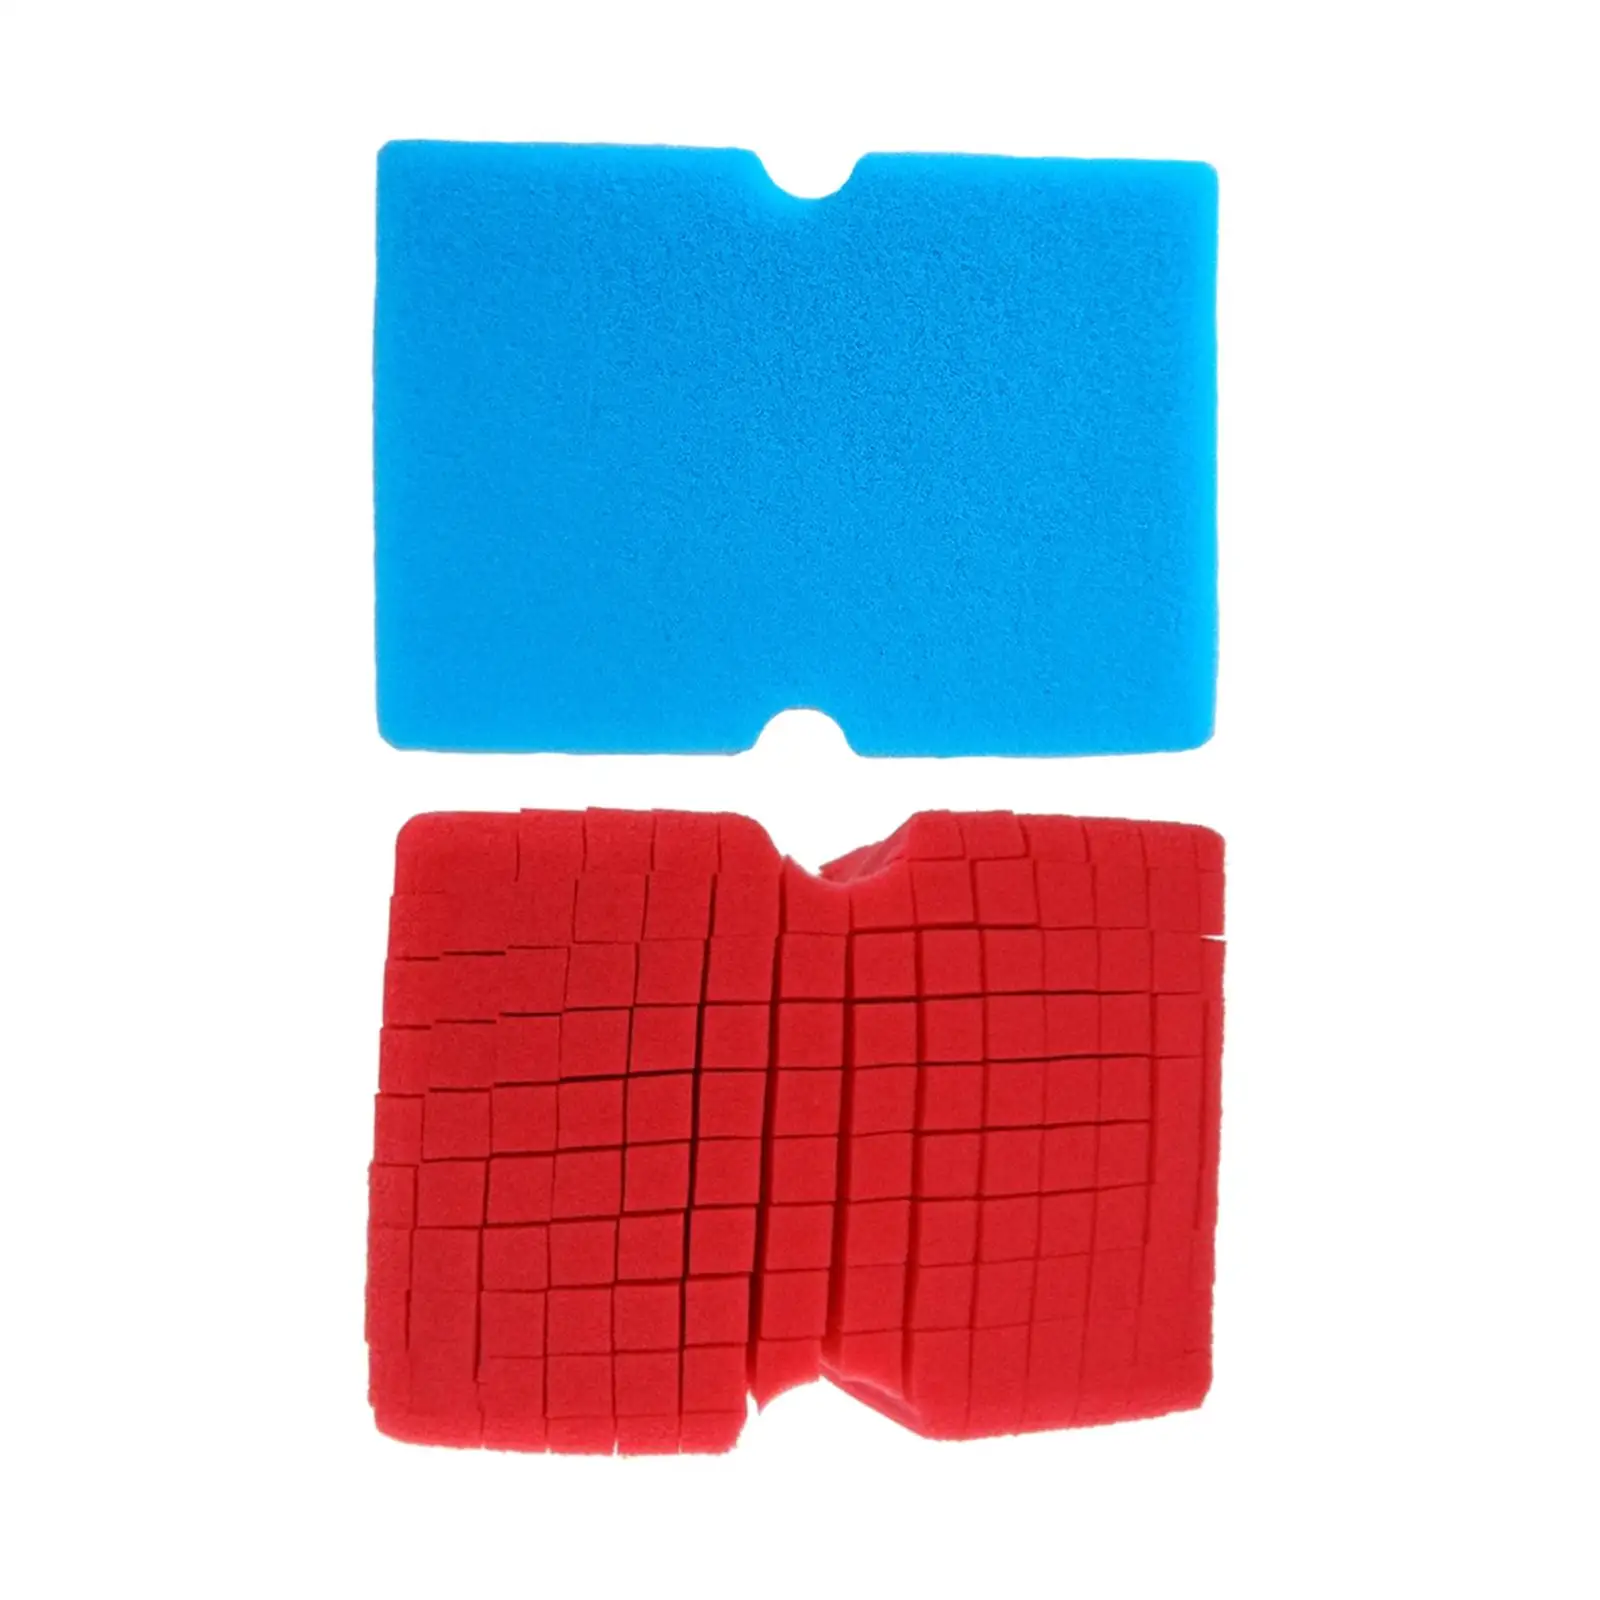 Damp Clean Duster Sponge Strong Water Absorbing Thick Soft Car Household Cleaning Sponge for Trucks Motorcycles Cars Boats